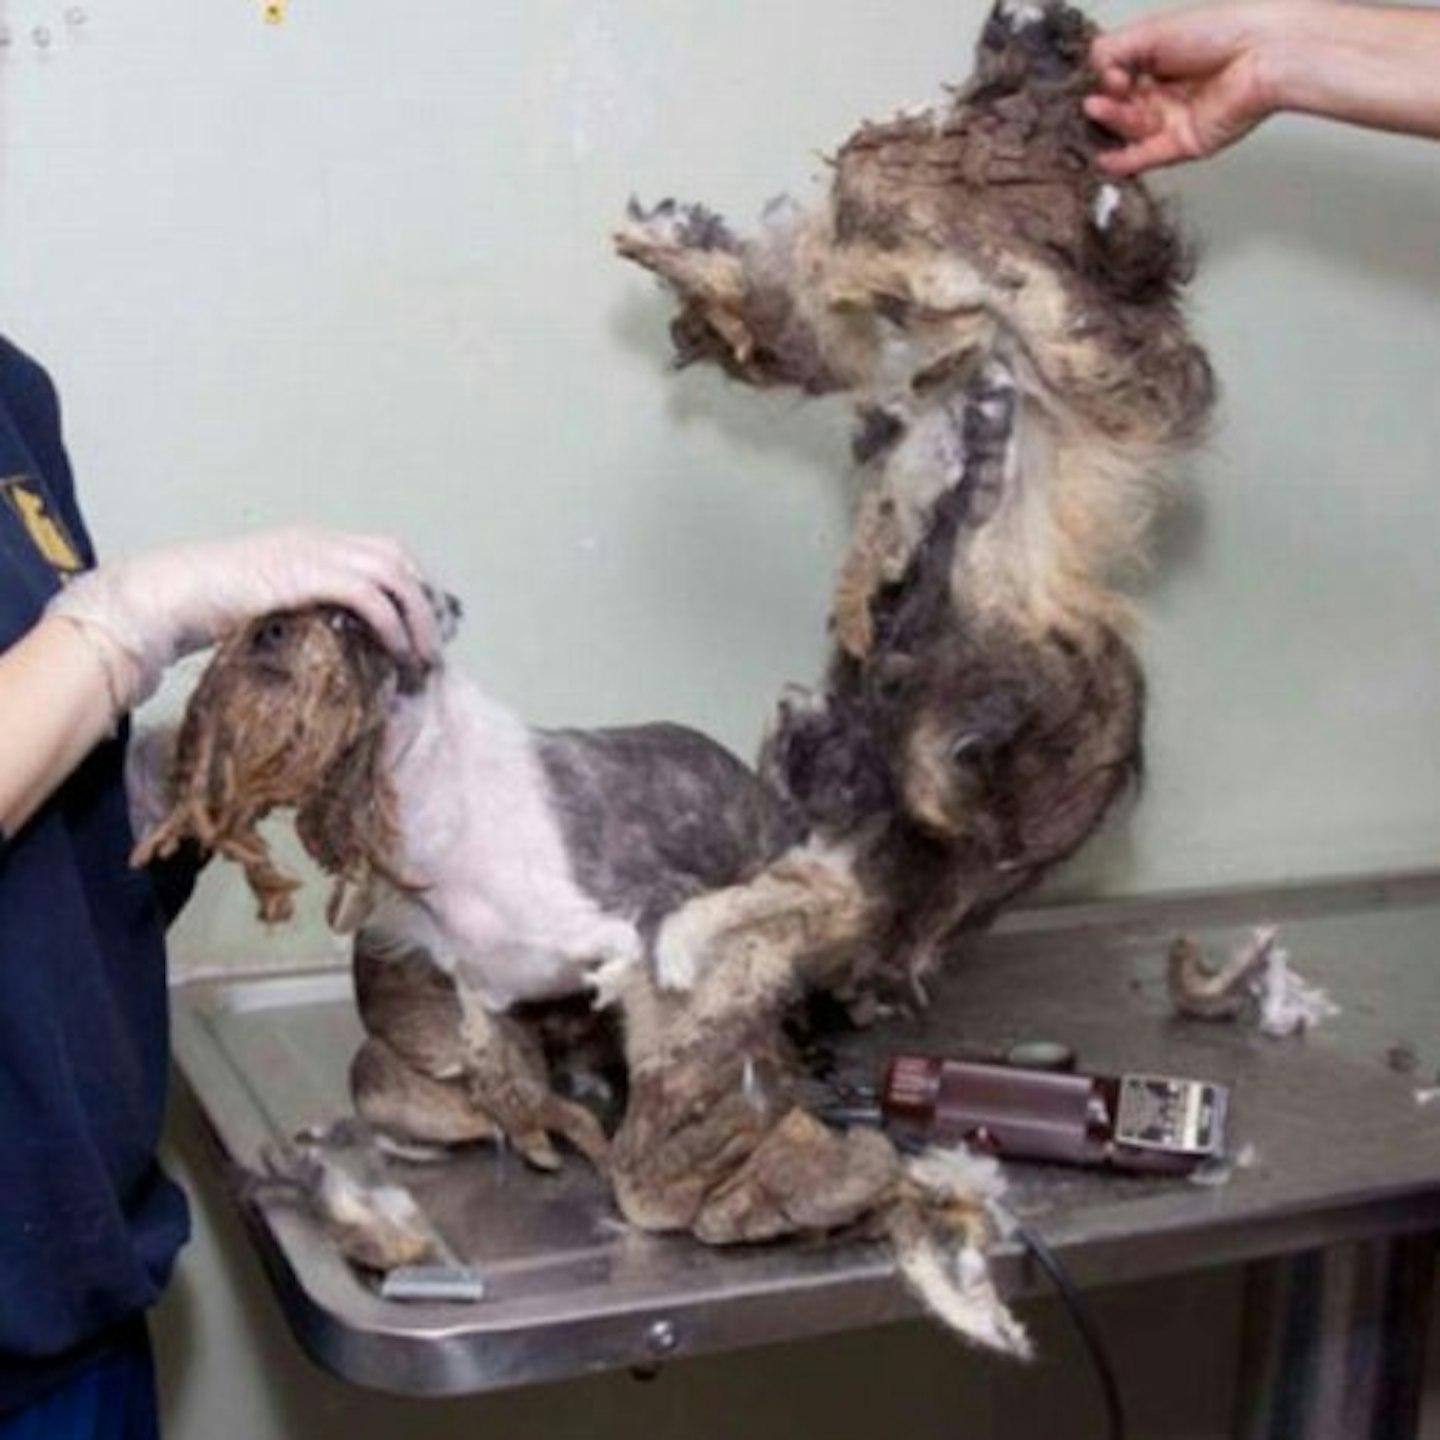 After being badly neglected, he was unrecognisable as a dog